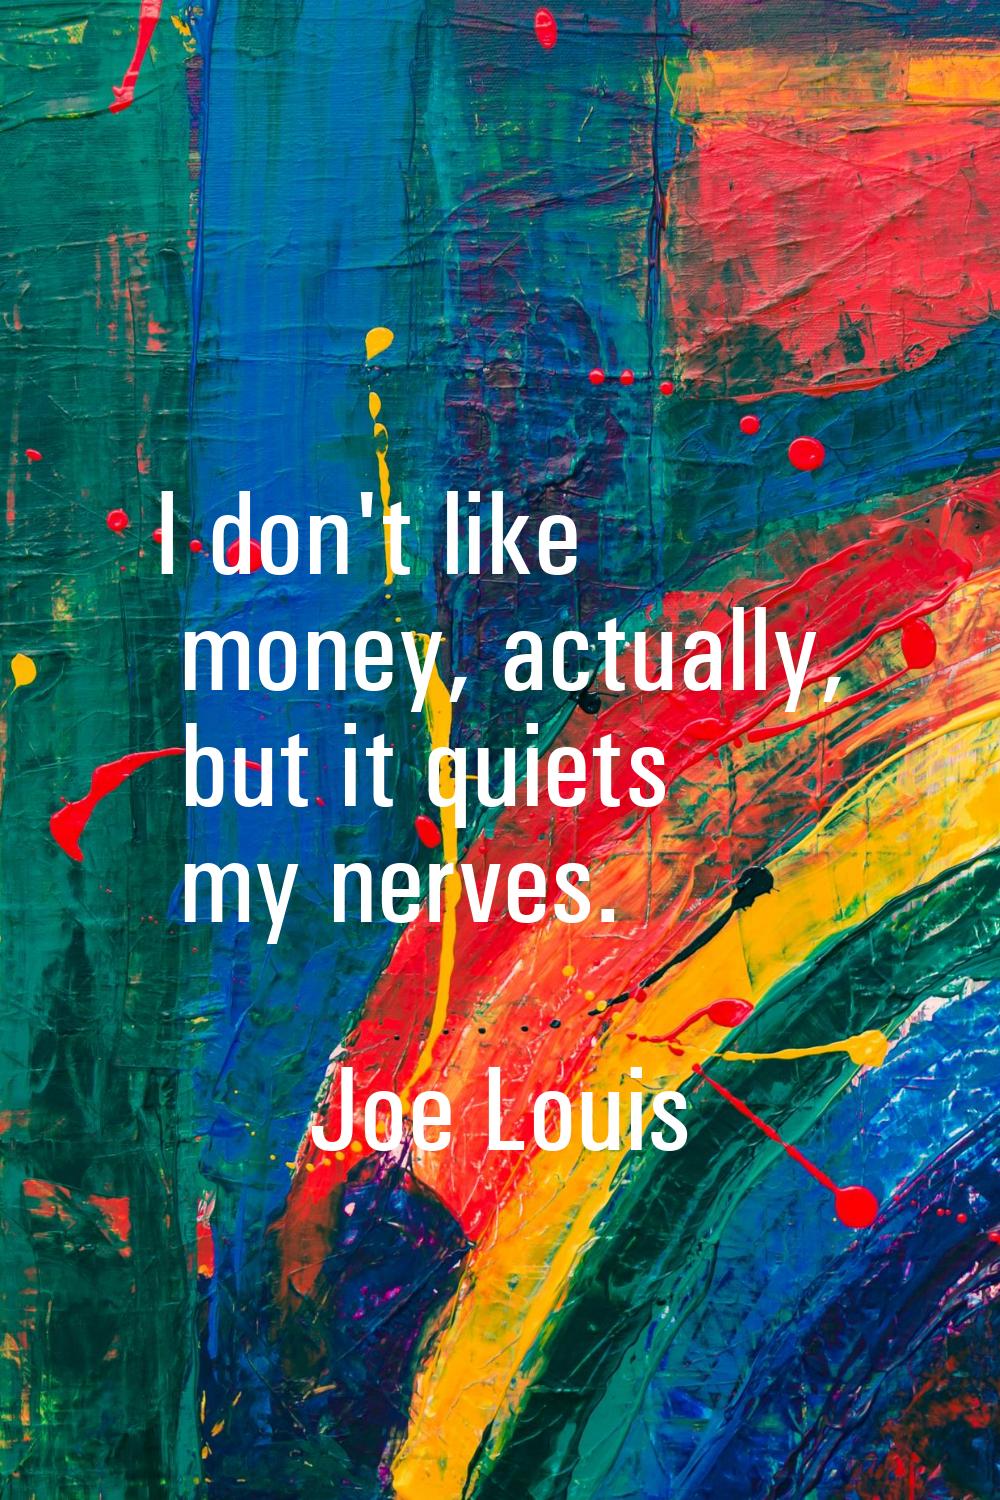 I don't like money, actually, but it quiets my nerves.